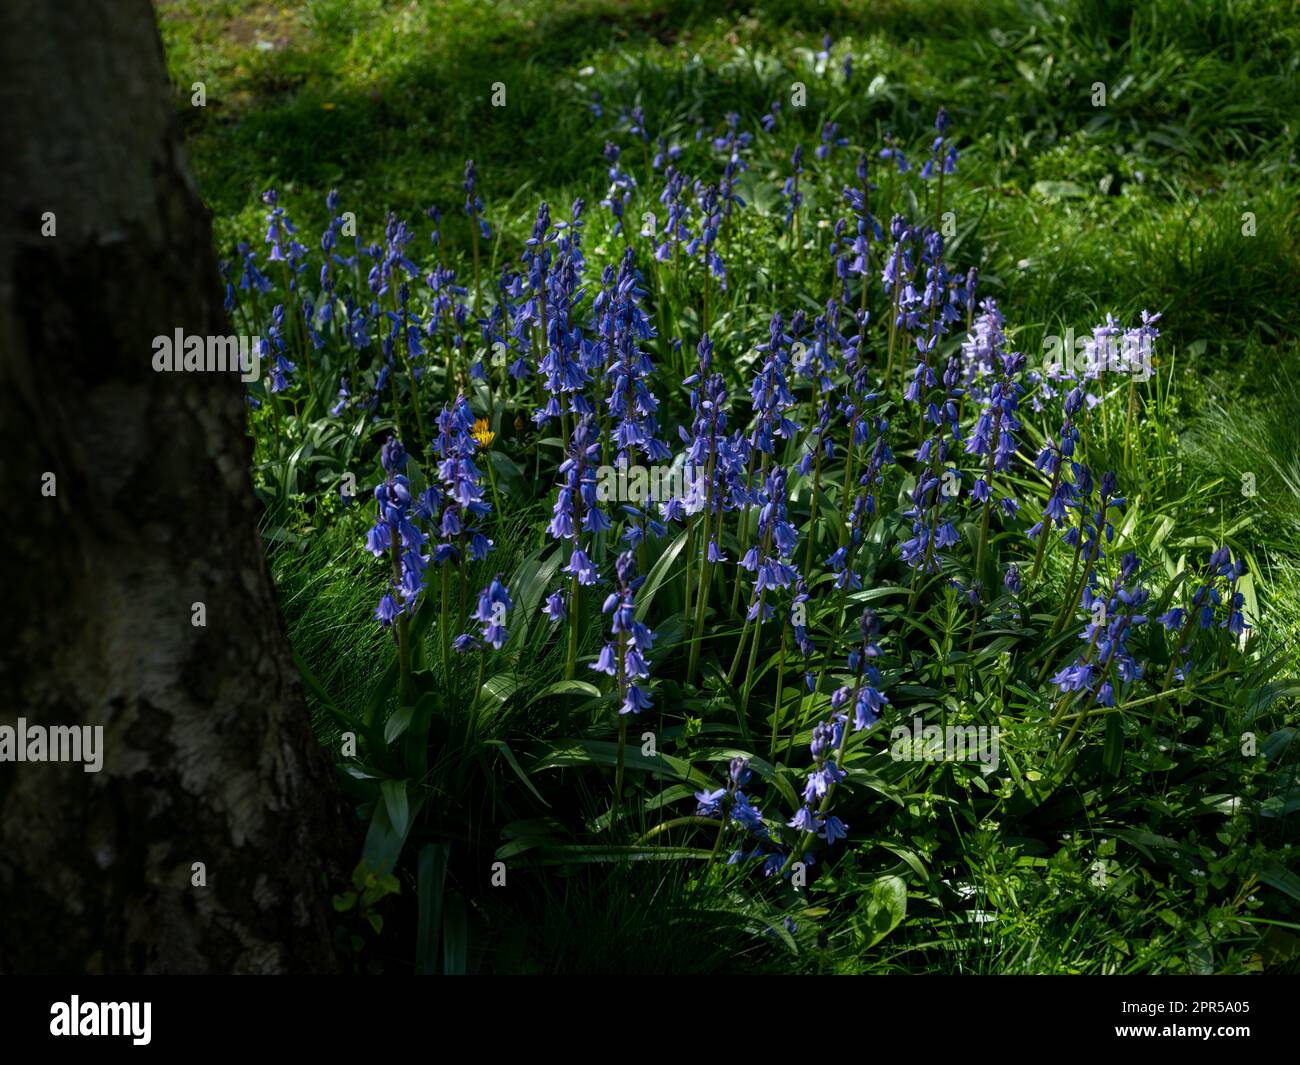 Bluebells growing in Merrion Square in Dublin city, Ireland. Stock Photo